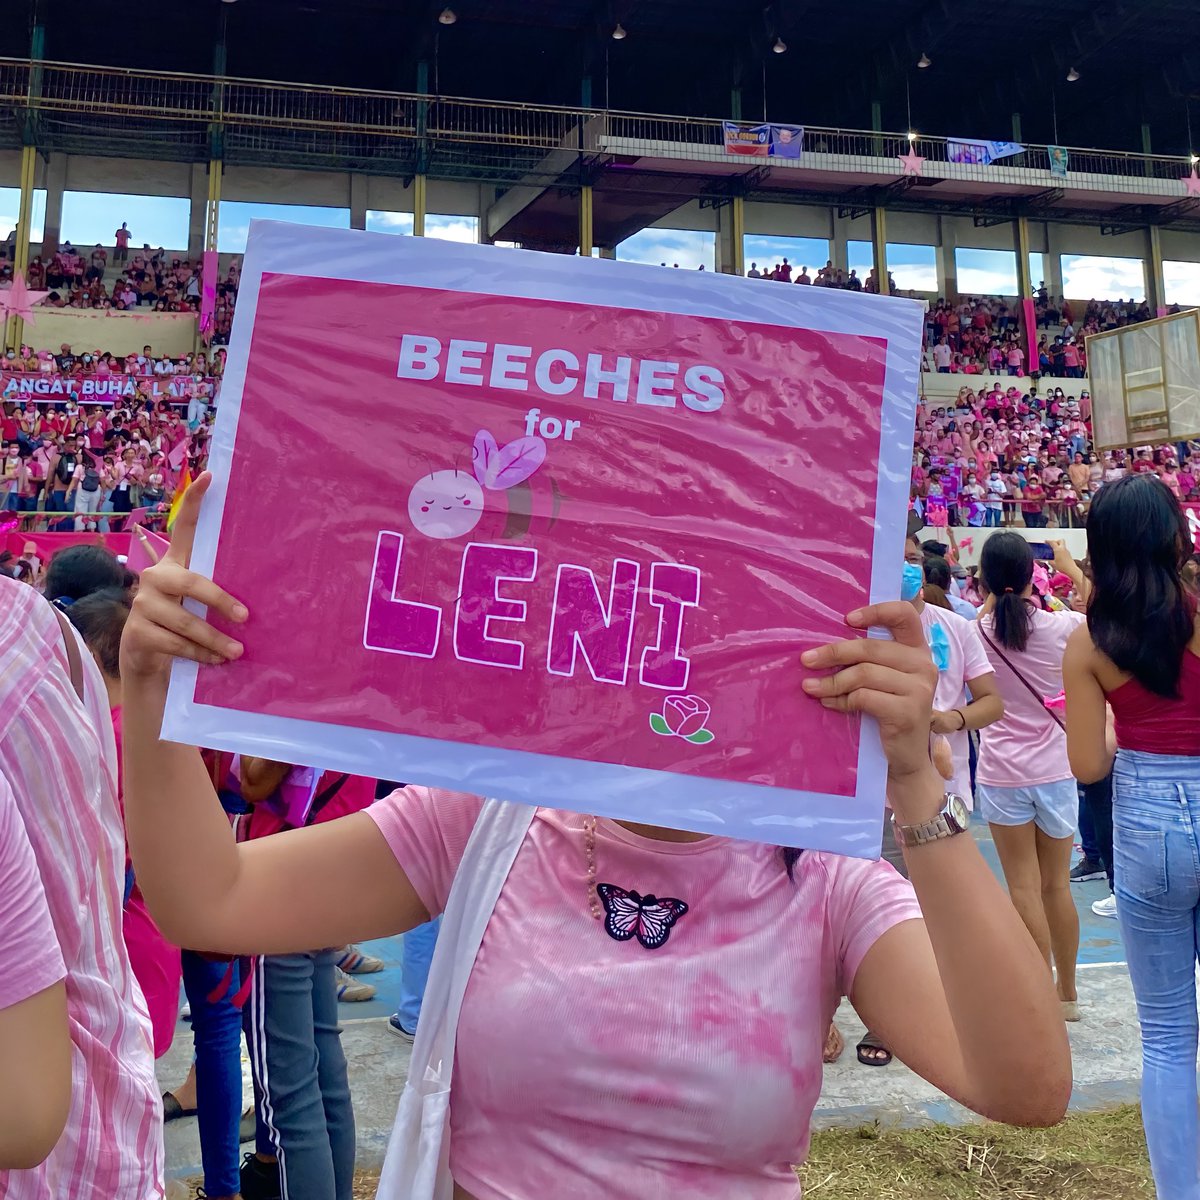 proud to say that I’m one of the 70,000 and more! @beeyotchWP 
crdts: @mallesquivel 
#BeechesForLeni
#MASSKARApatDapatLeniKiko
#BacolodIsPink #NegOccIsPink